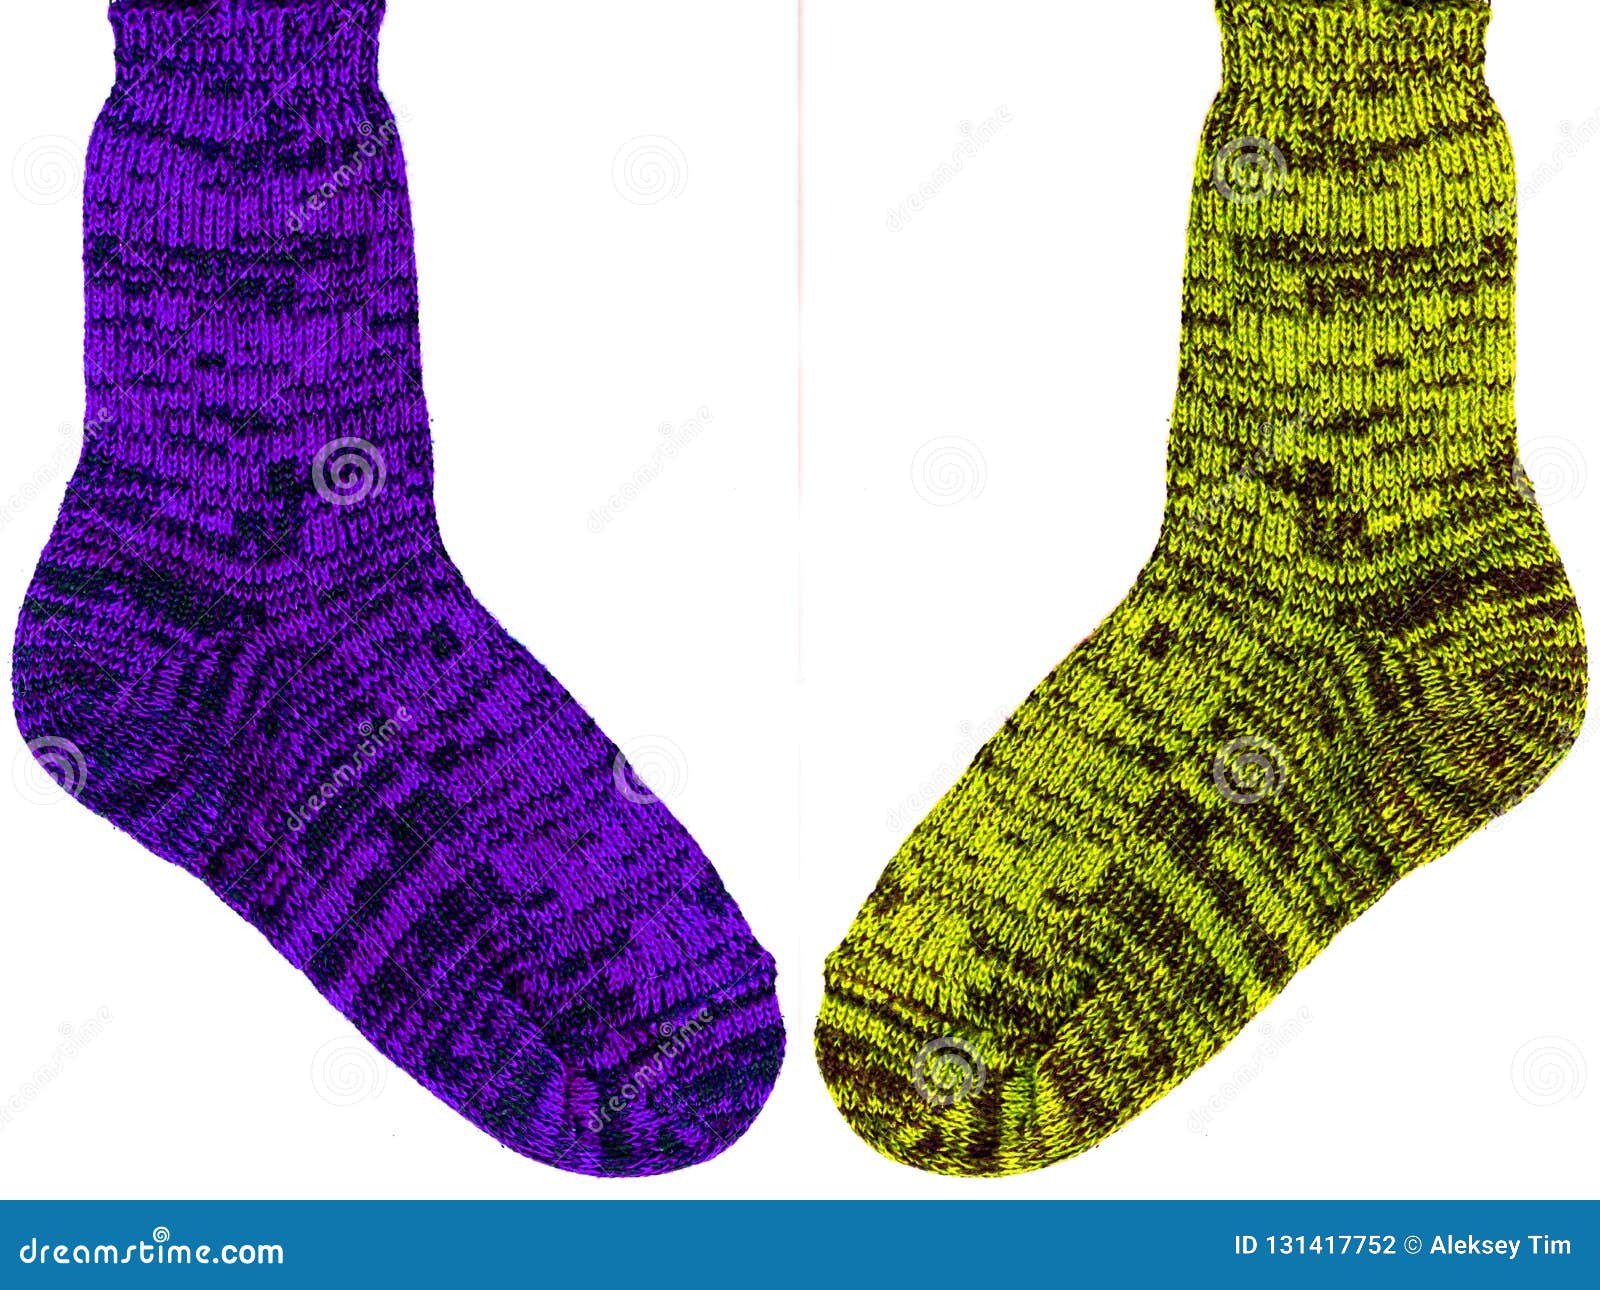 Warm Knitted Colored Sock on a White Background Stock Photo - Image of ...